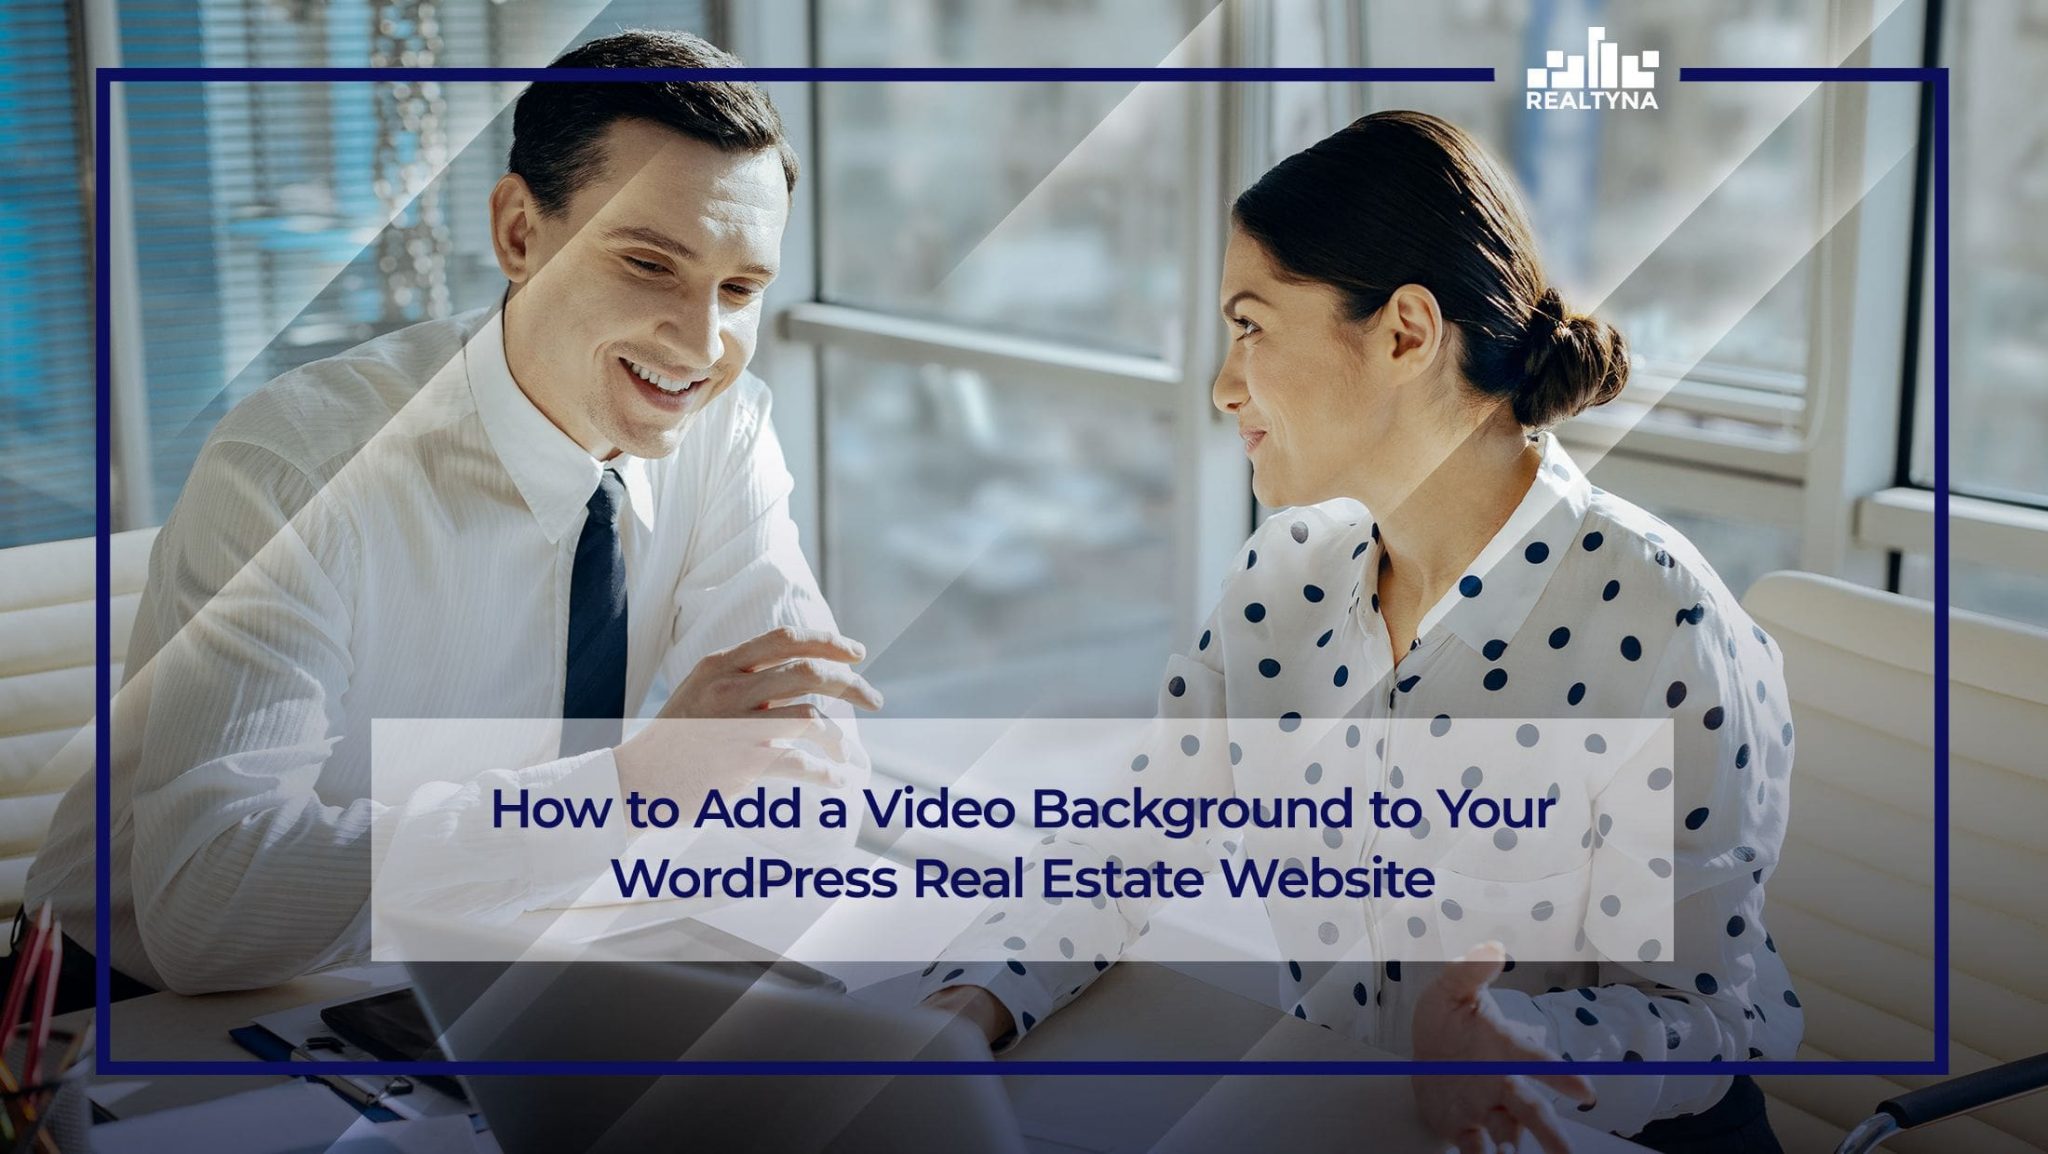 How-to-Add-a-Video-Background-to-Your-WordPress-Real-Estate-Website-.jpeg